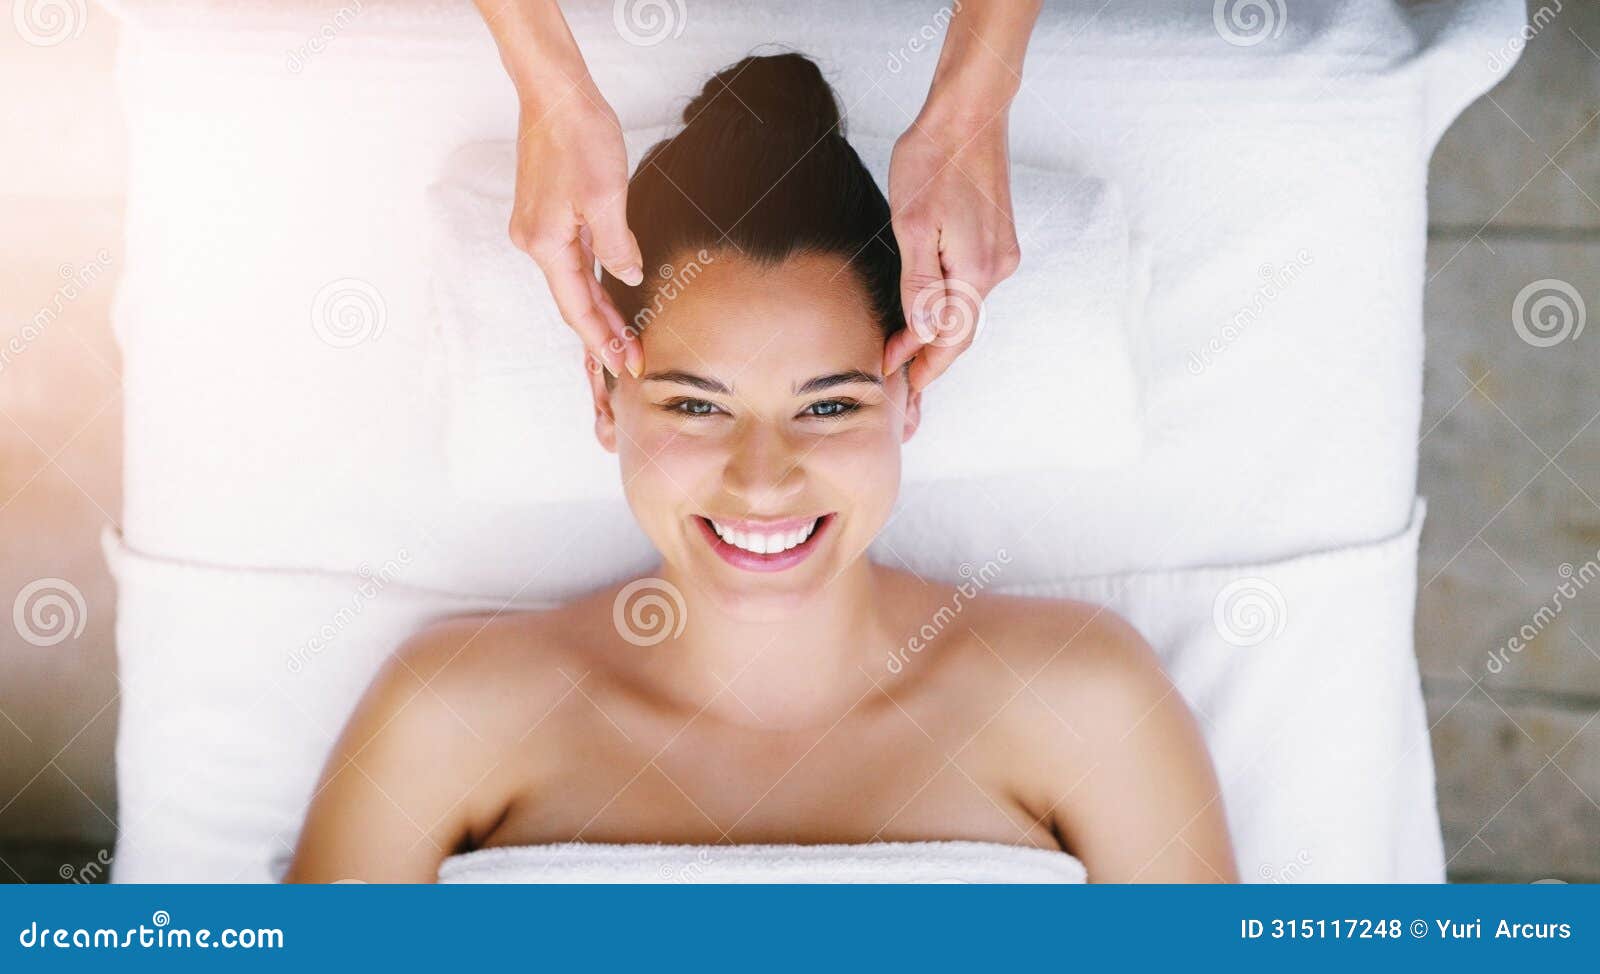 happy, salon and portrait of woman at spa for massage, facial treatment and luxury pamper. aesthetic, dermatology and